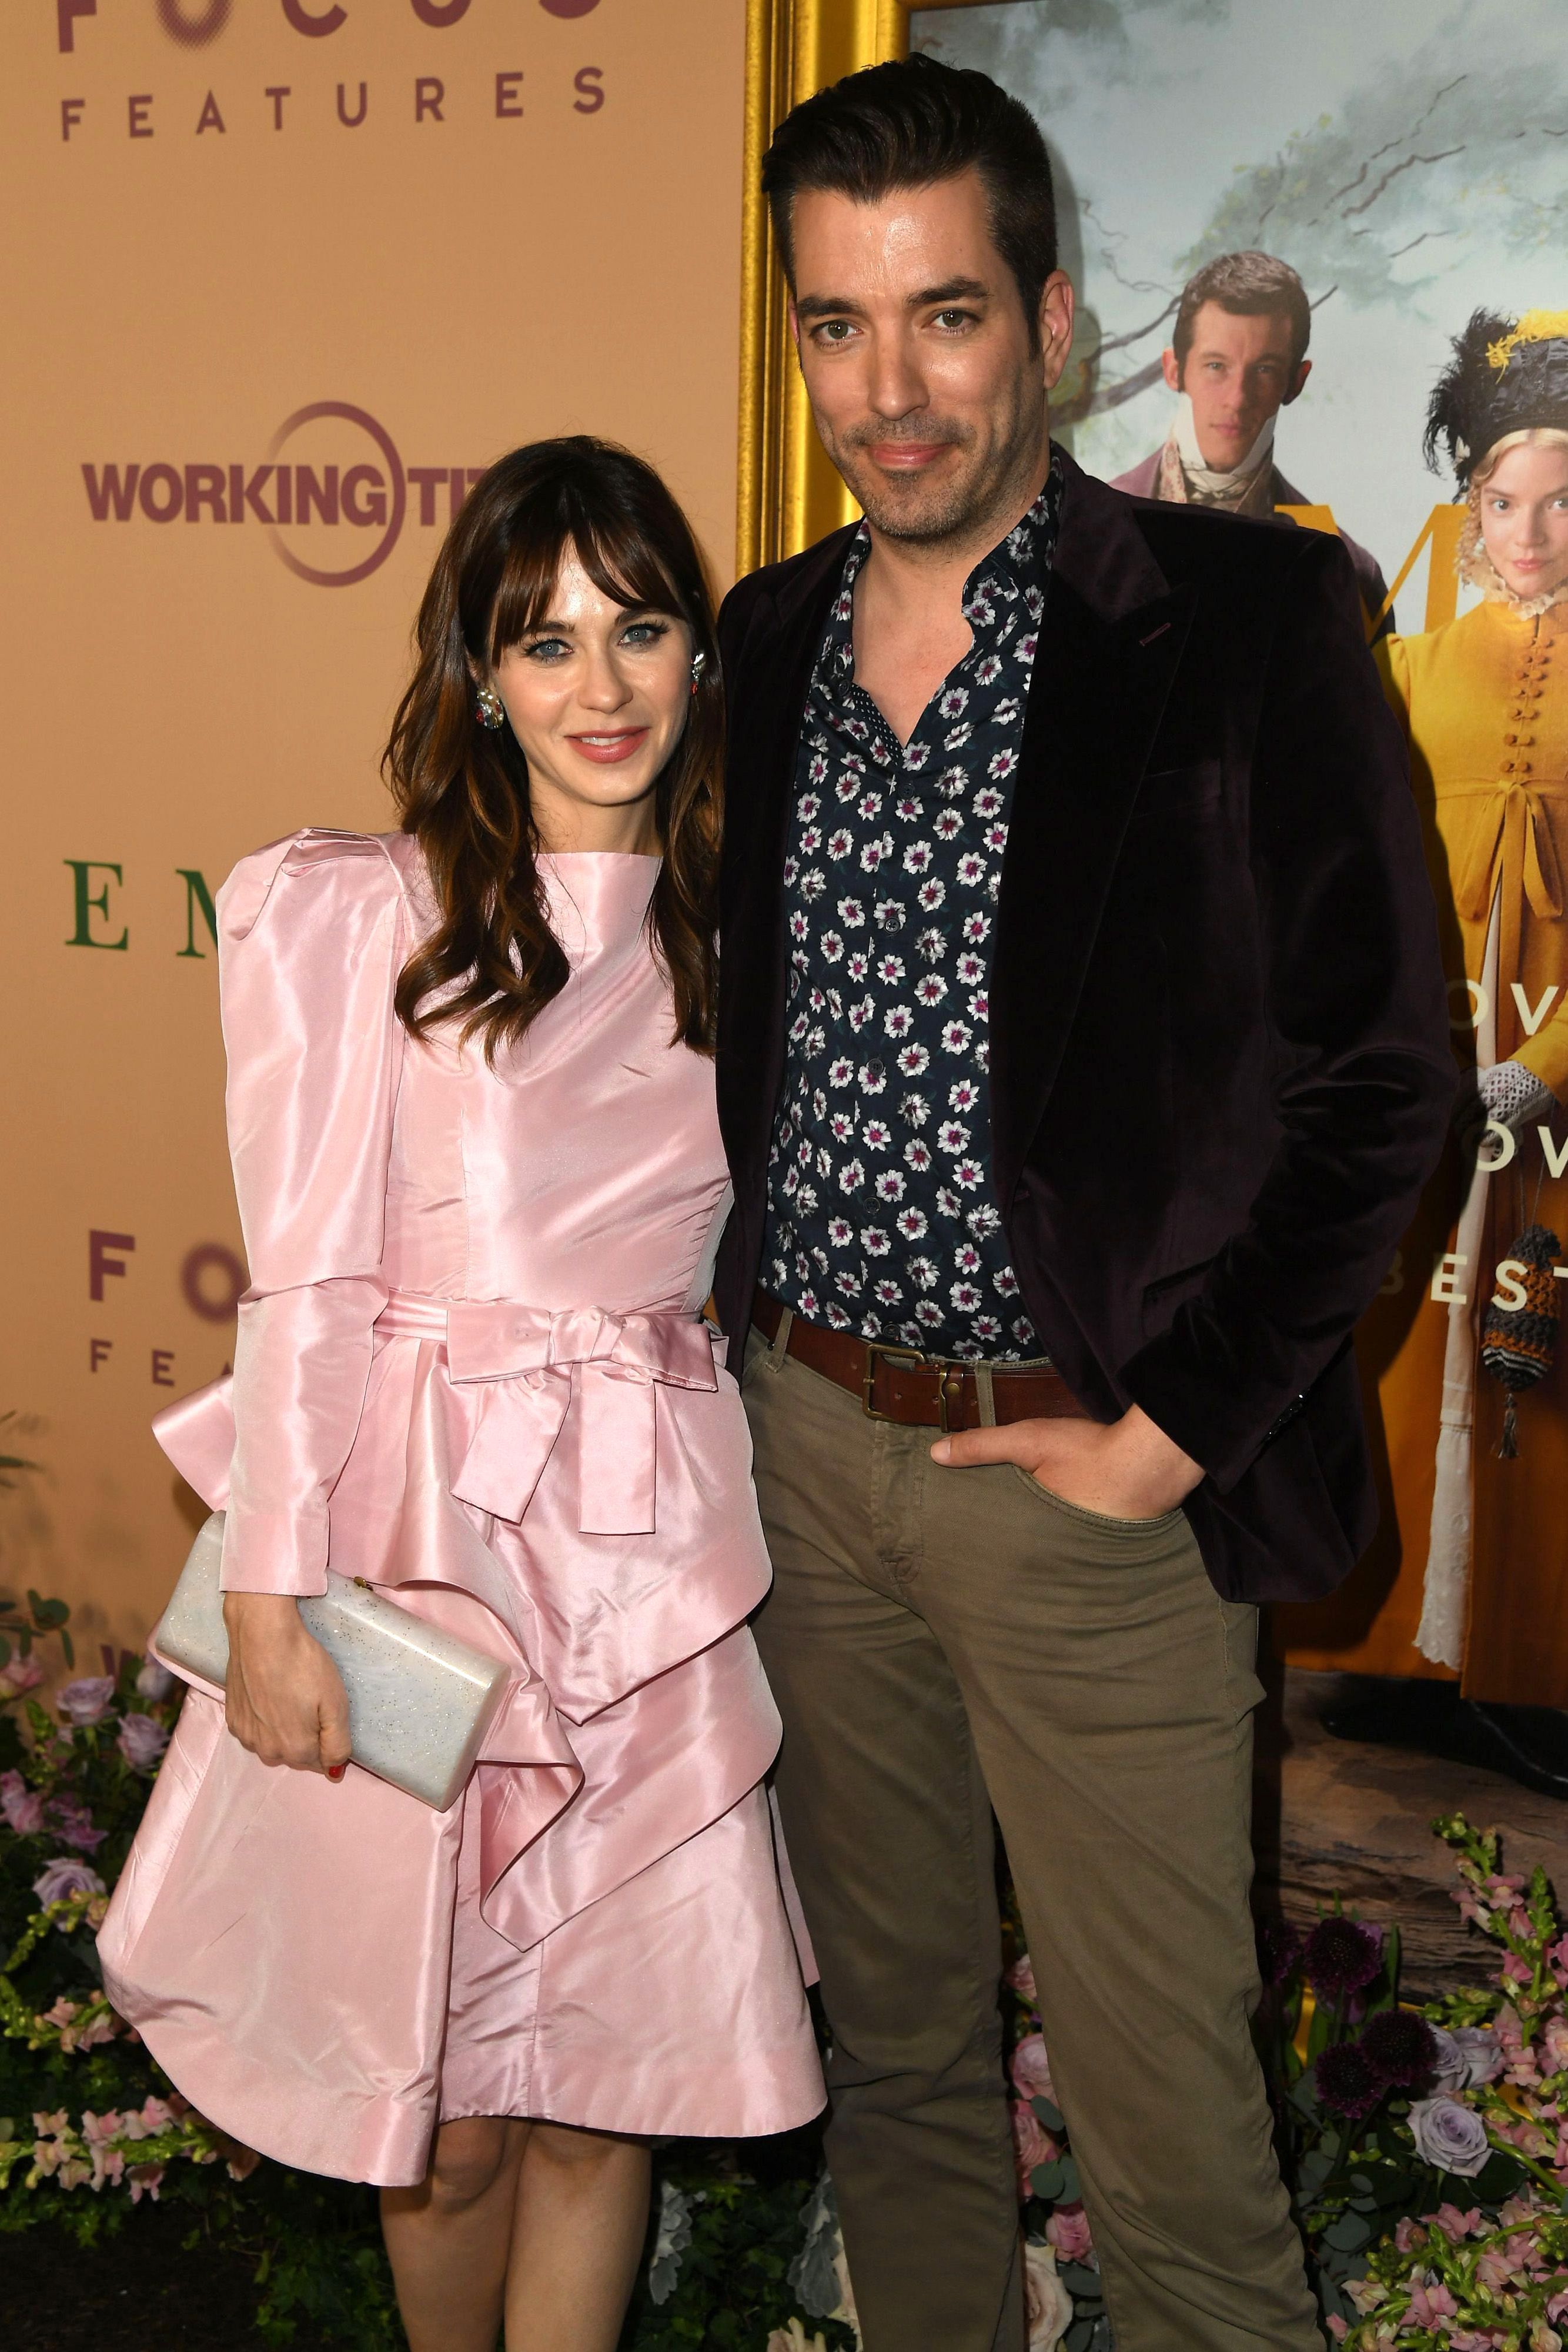 Zooey Deschanel and Jonathan Scott at the premiere of Focus Features' "Emma." at DGA Theater on February 18, 2020 in Los Angeles, California. | Source: Getty Images